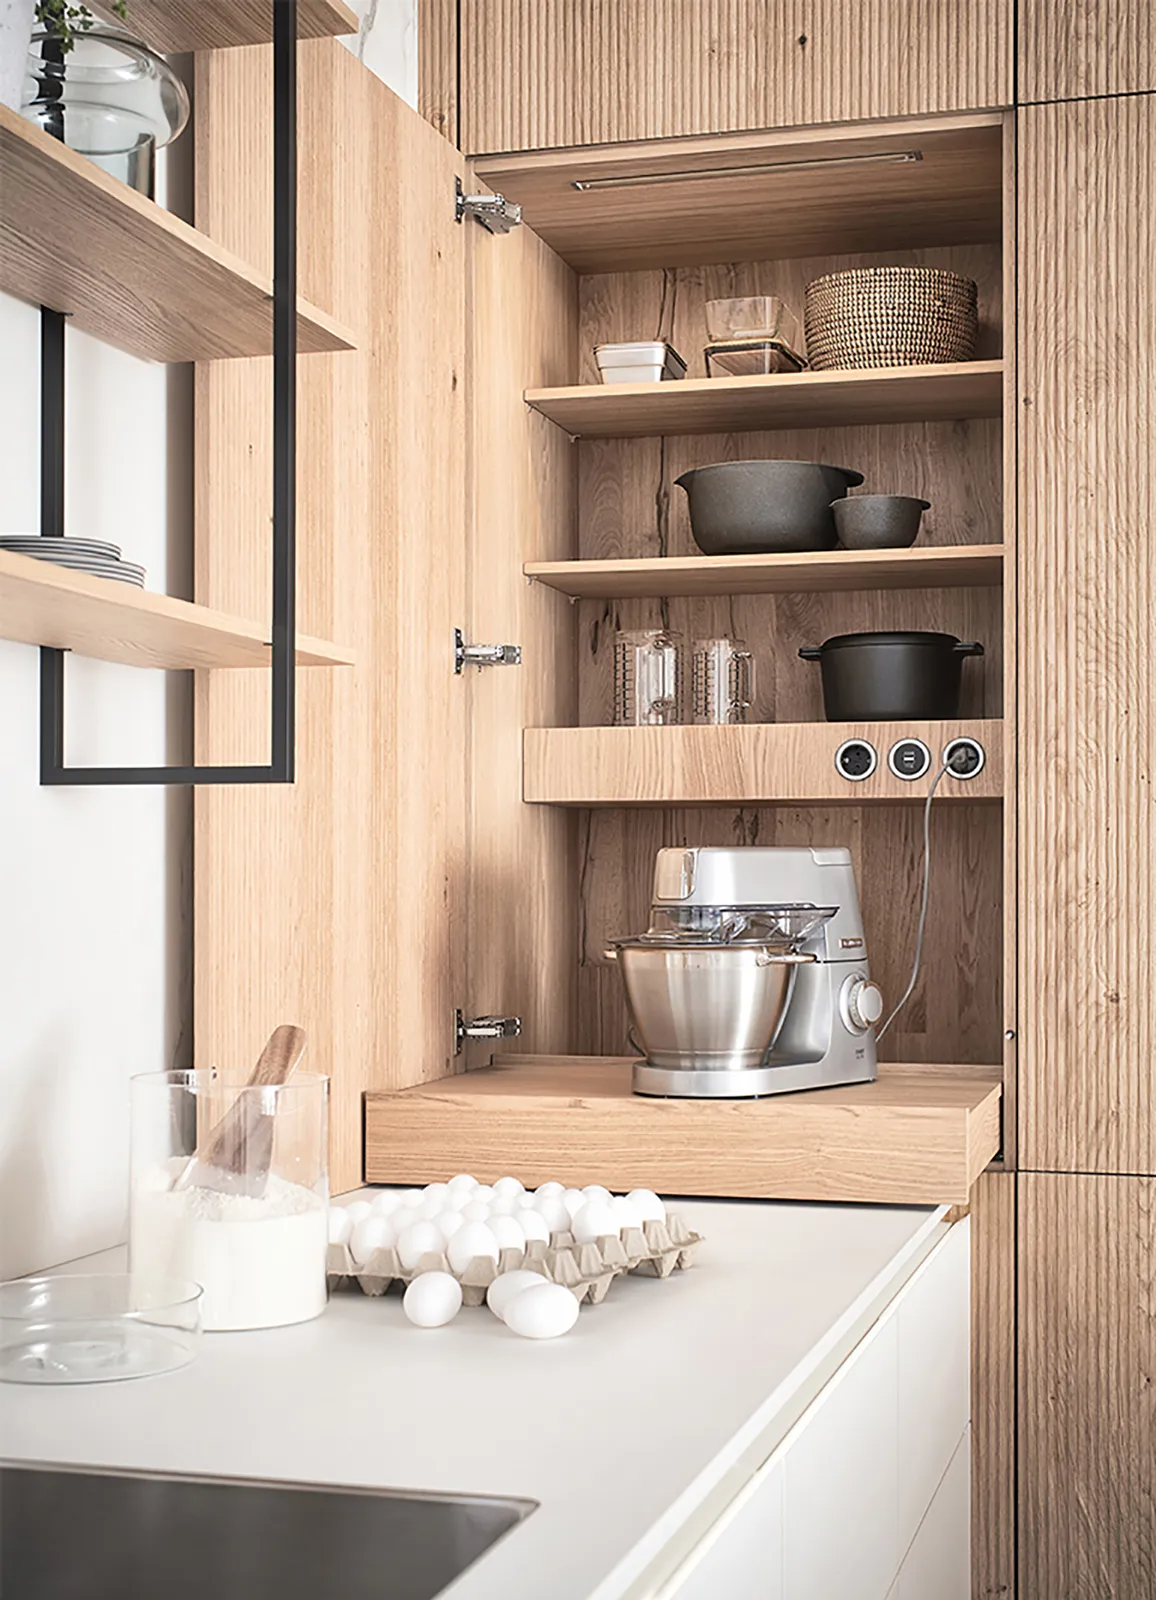 Maximizing Space: Organizing Your Kitchen with Storage Cabinets